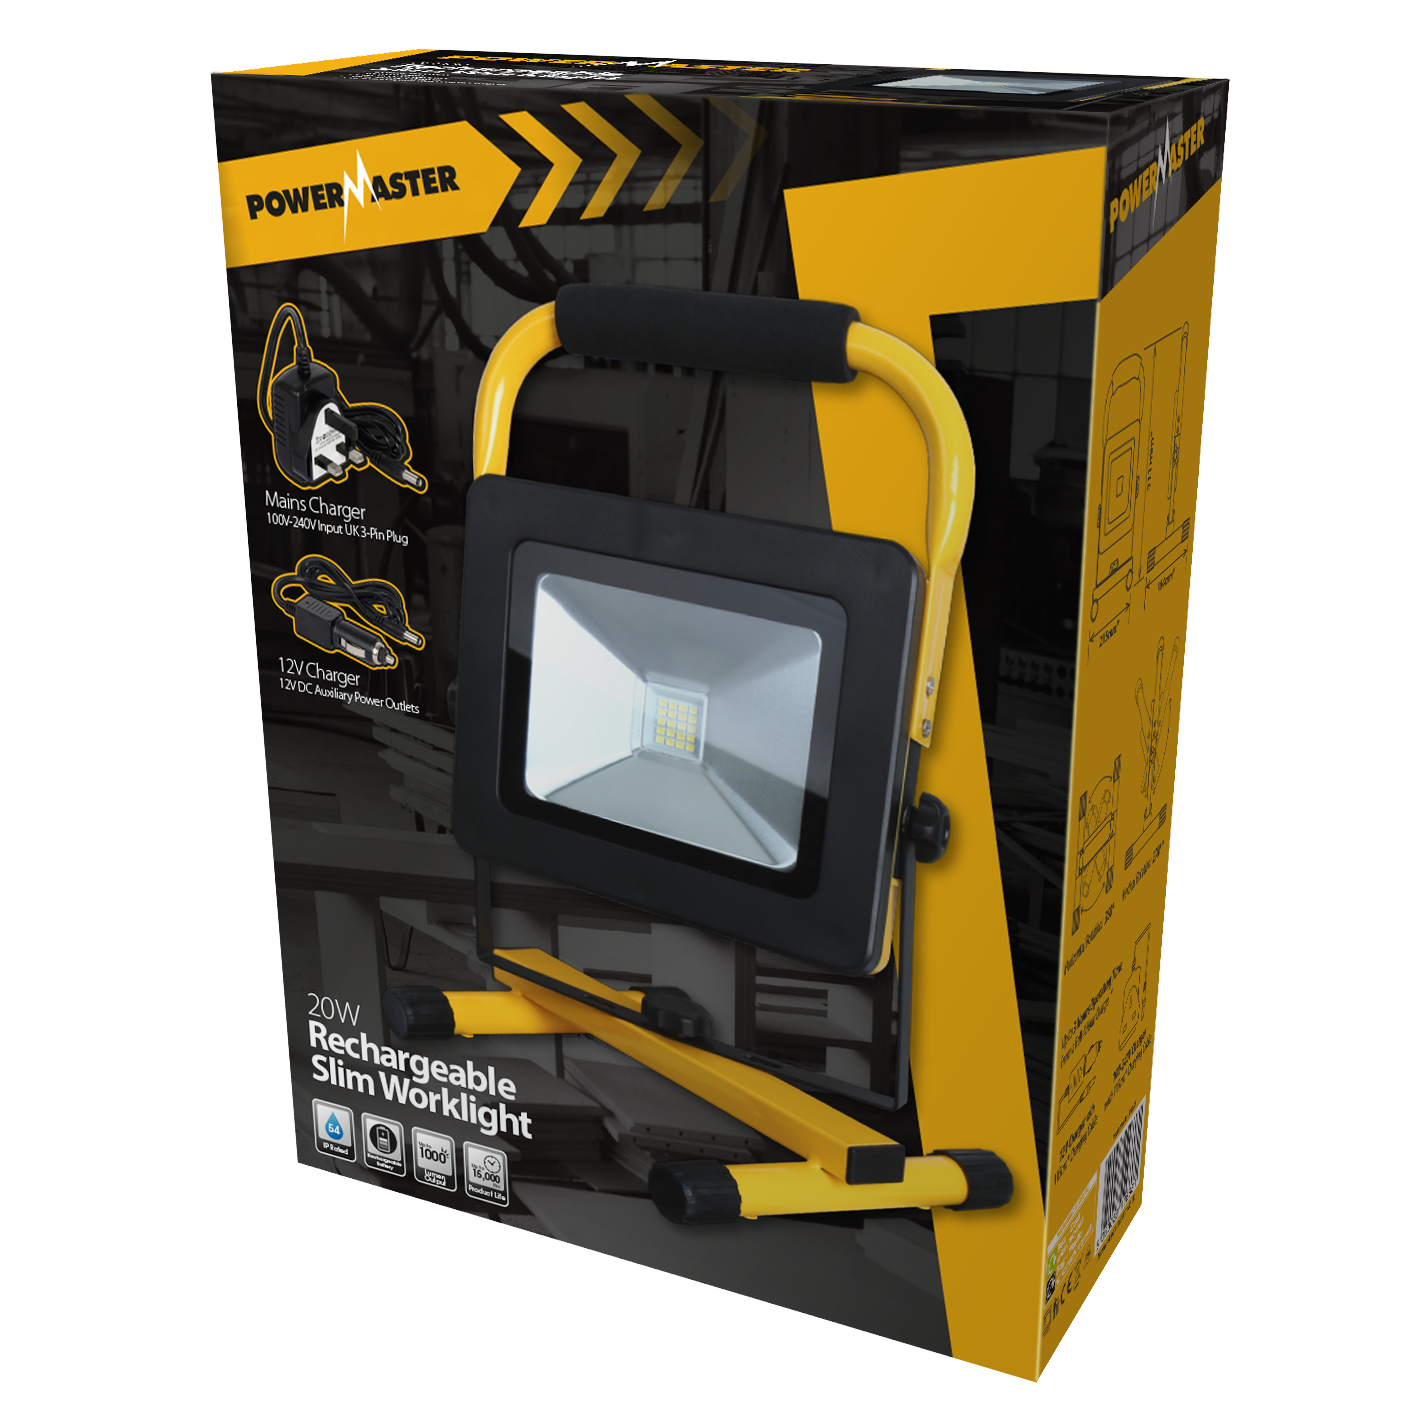 PowerMaster LED Rechargeable Worklight - 20W